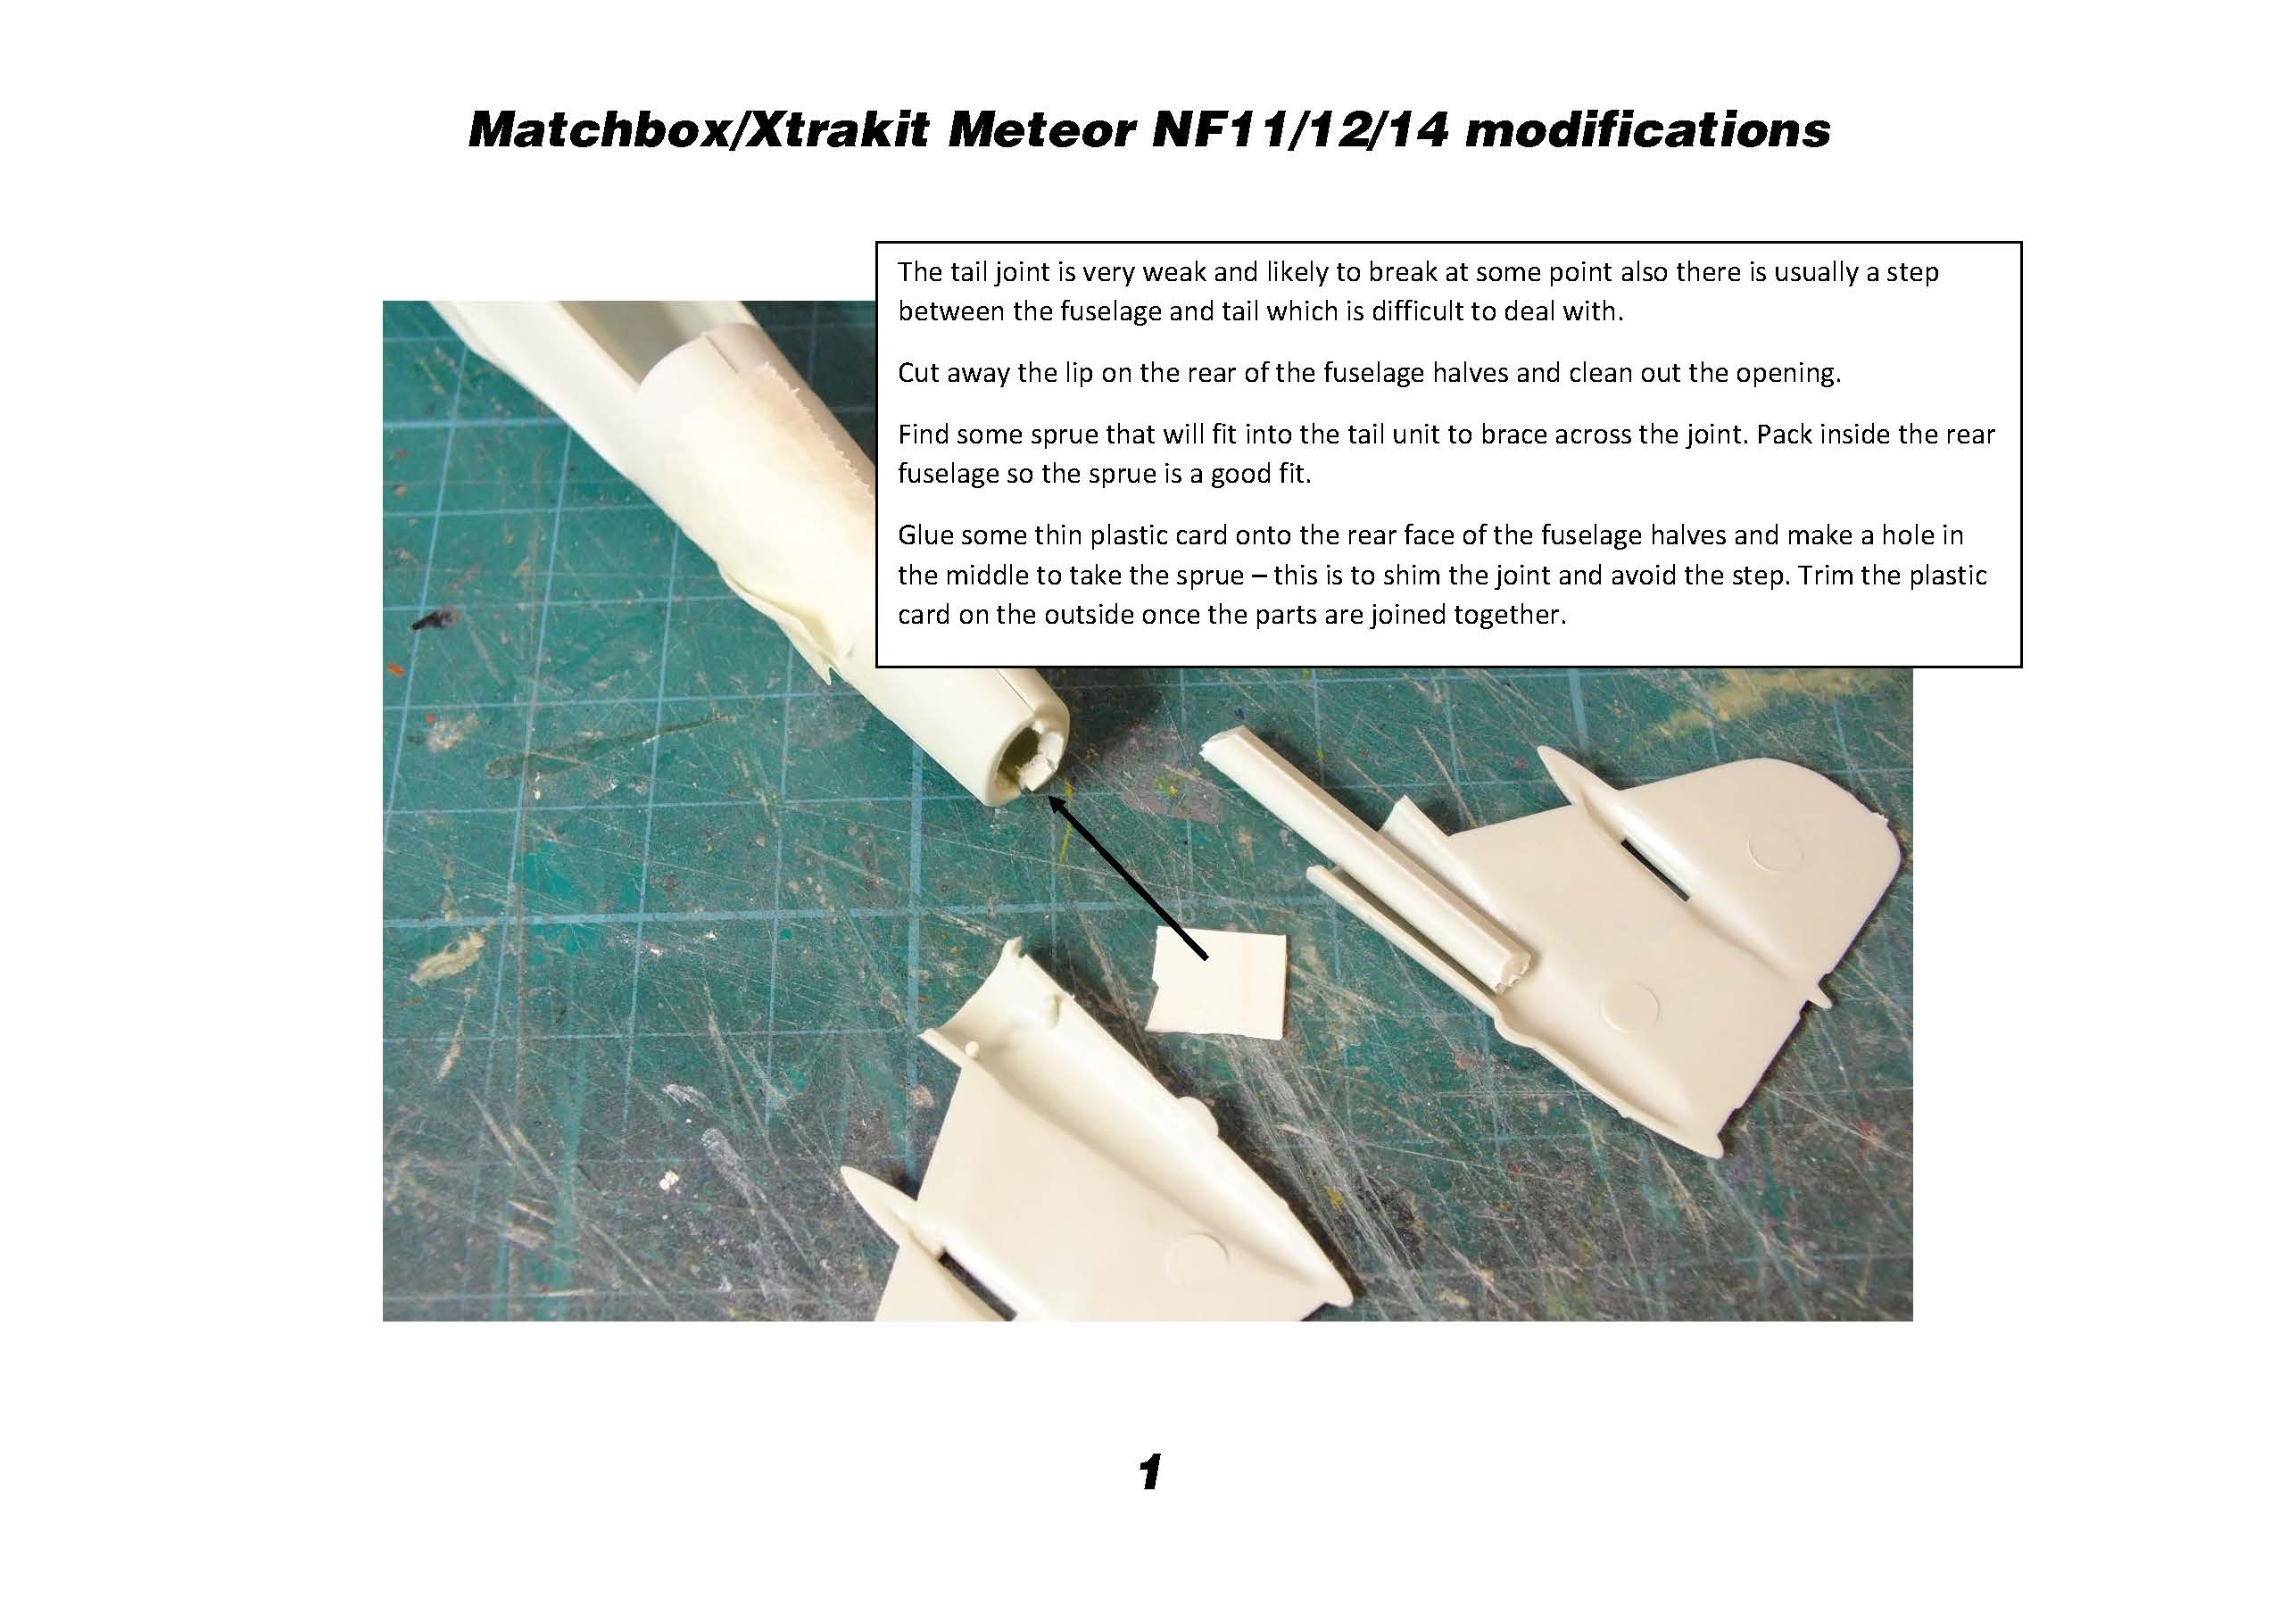 NF kit modifications_Page_1.jpg  by Britjet